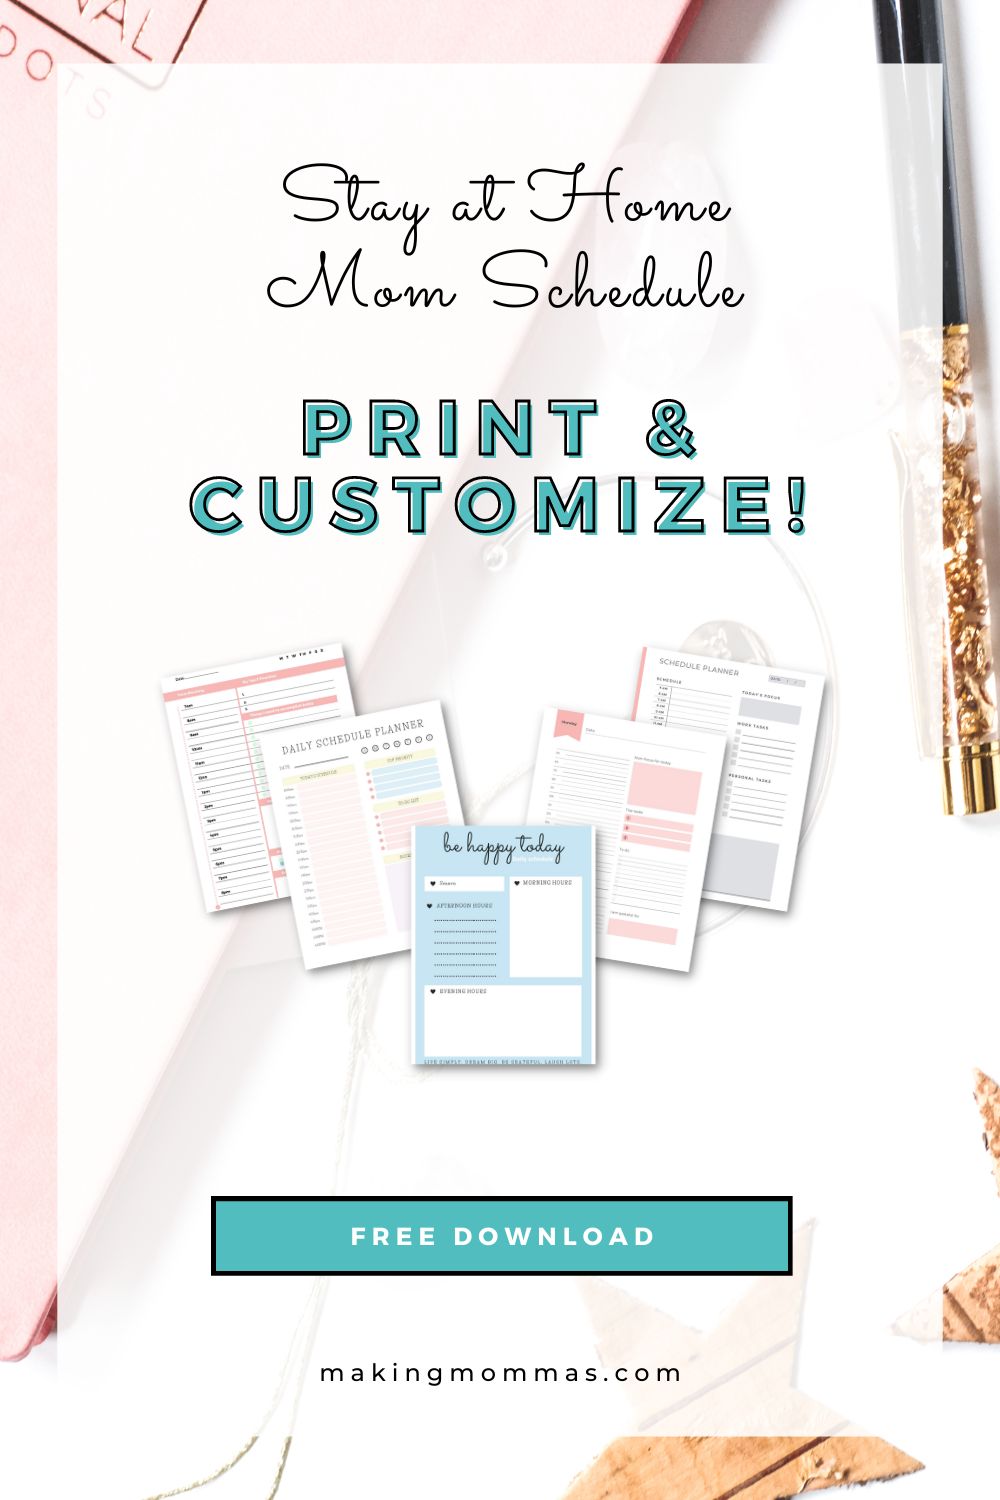 Pin of a free stay at home mom schedule that you can download, customize and print